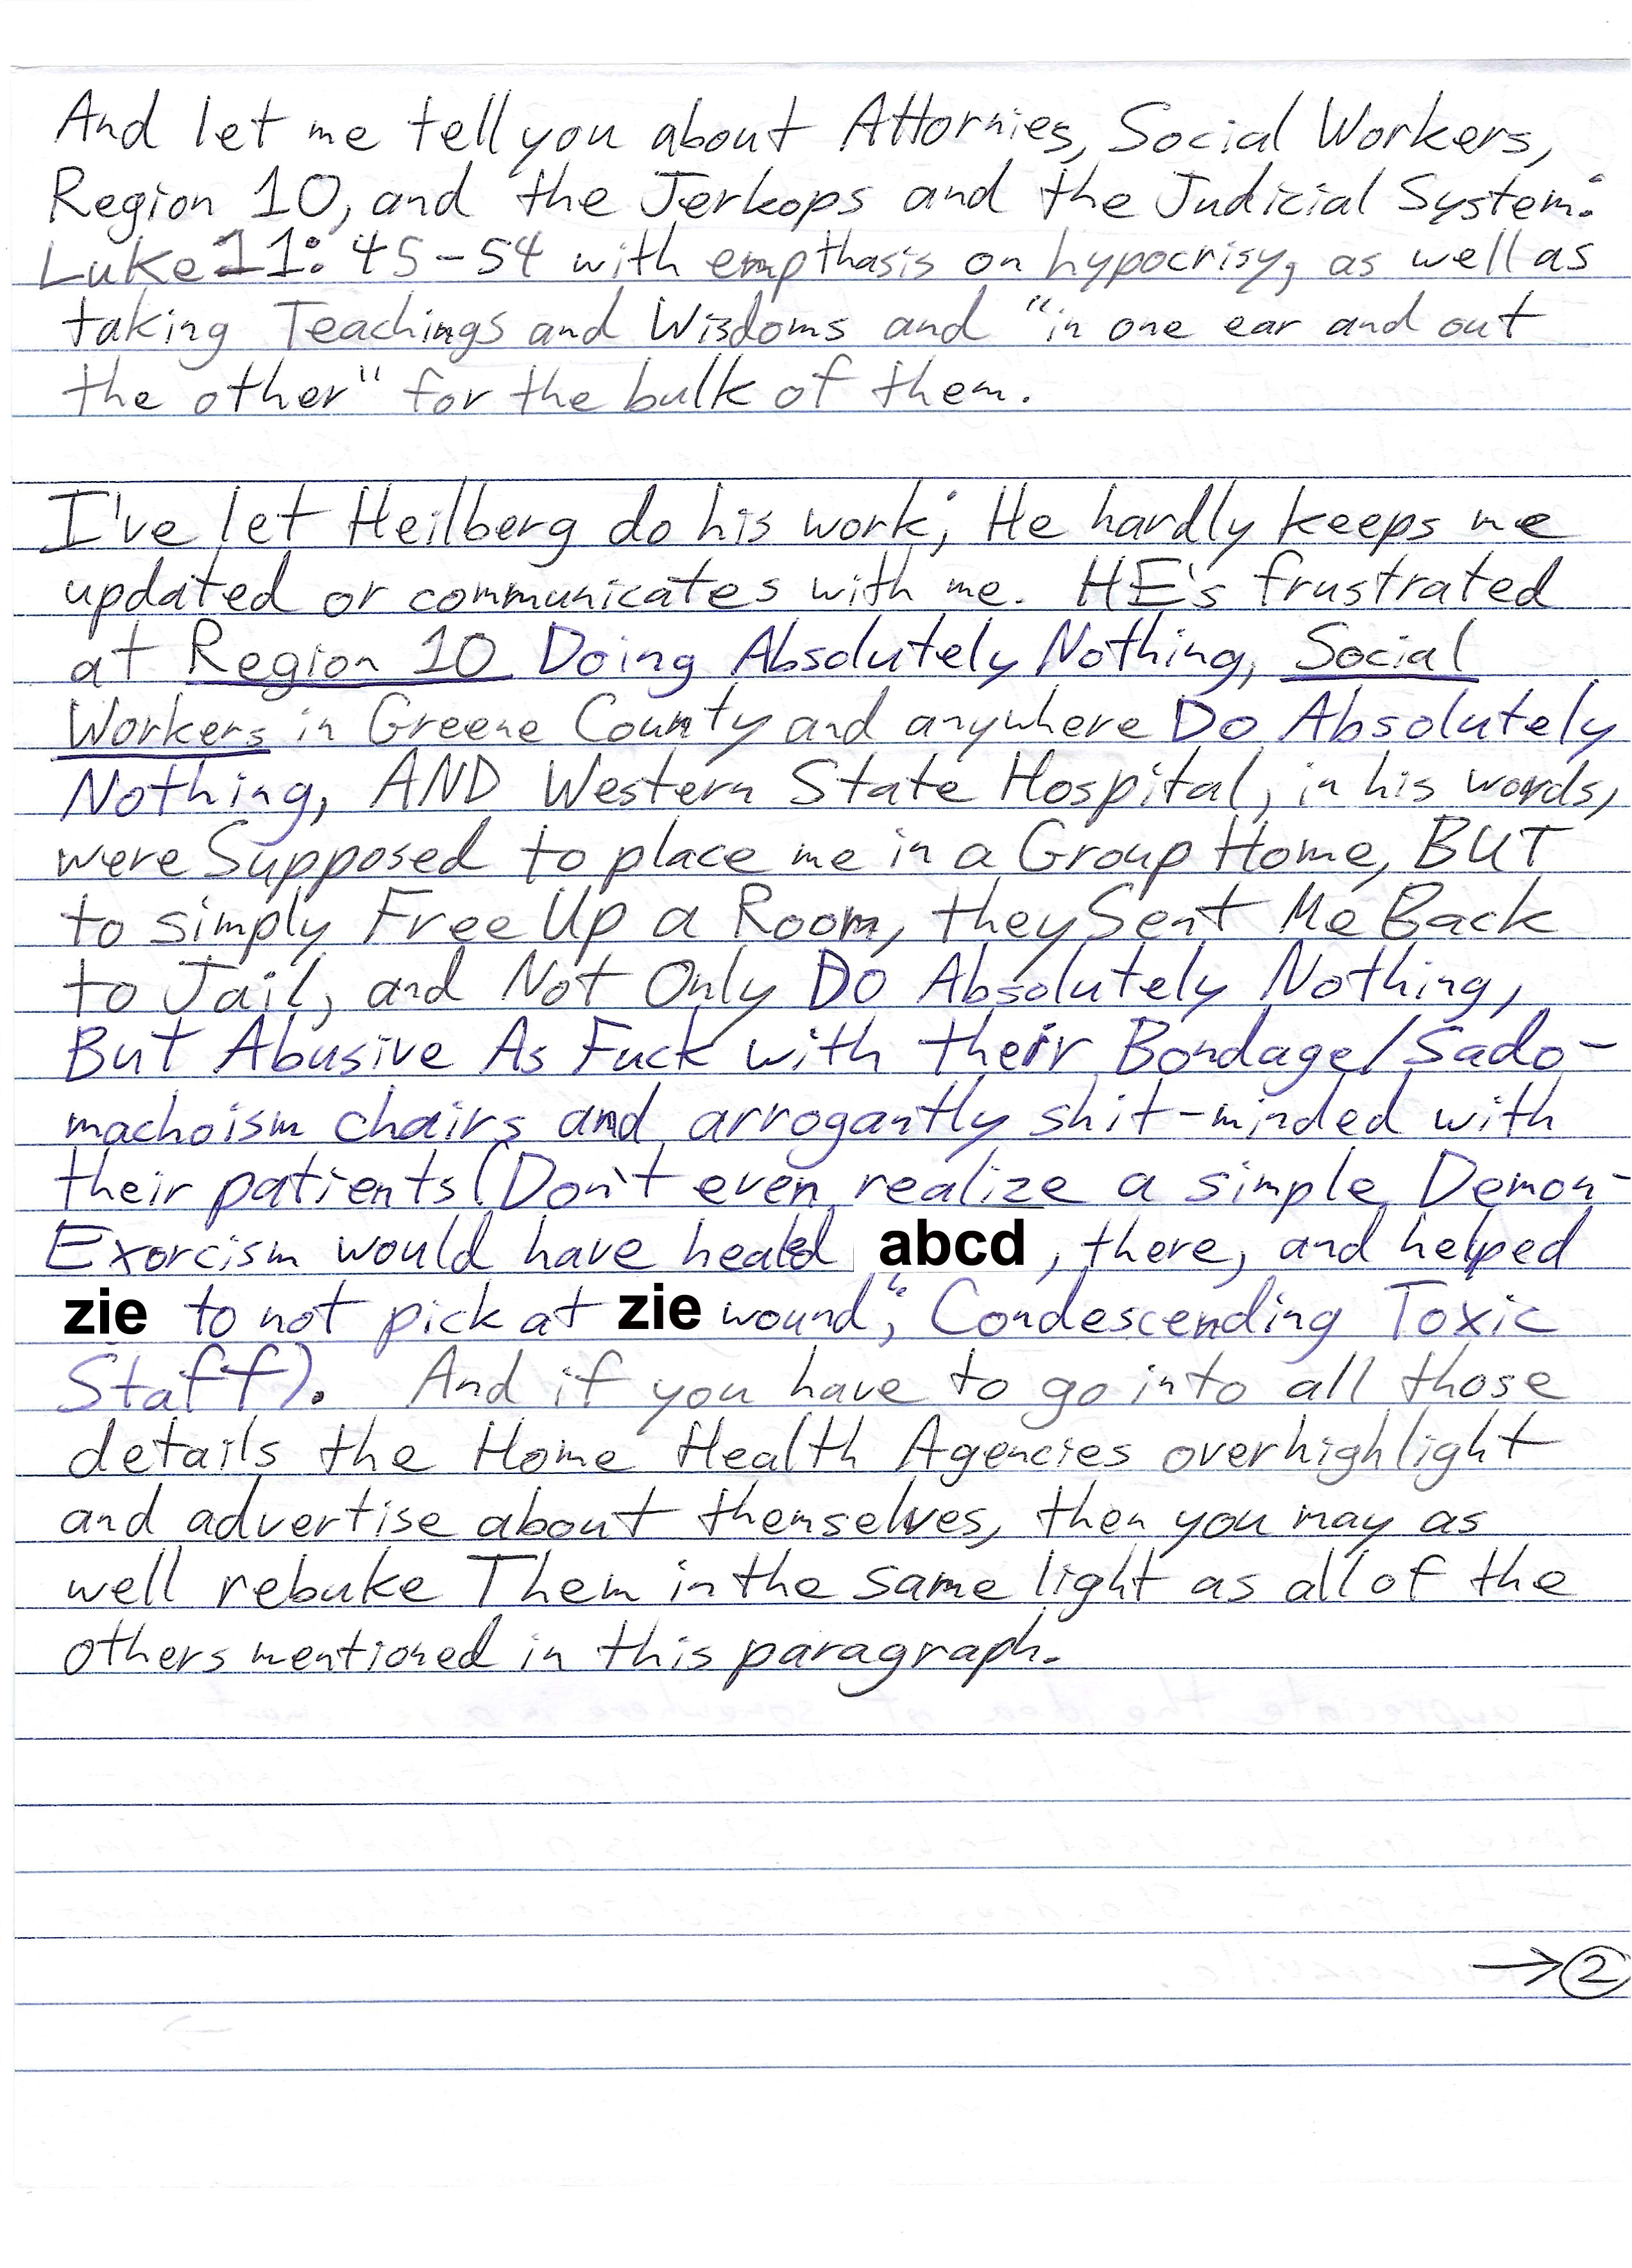 Letter Page 2.jpg